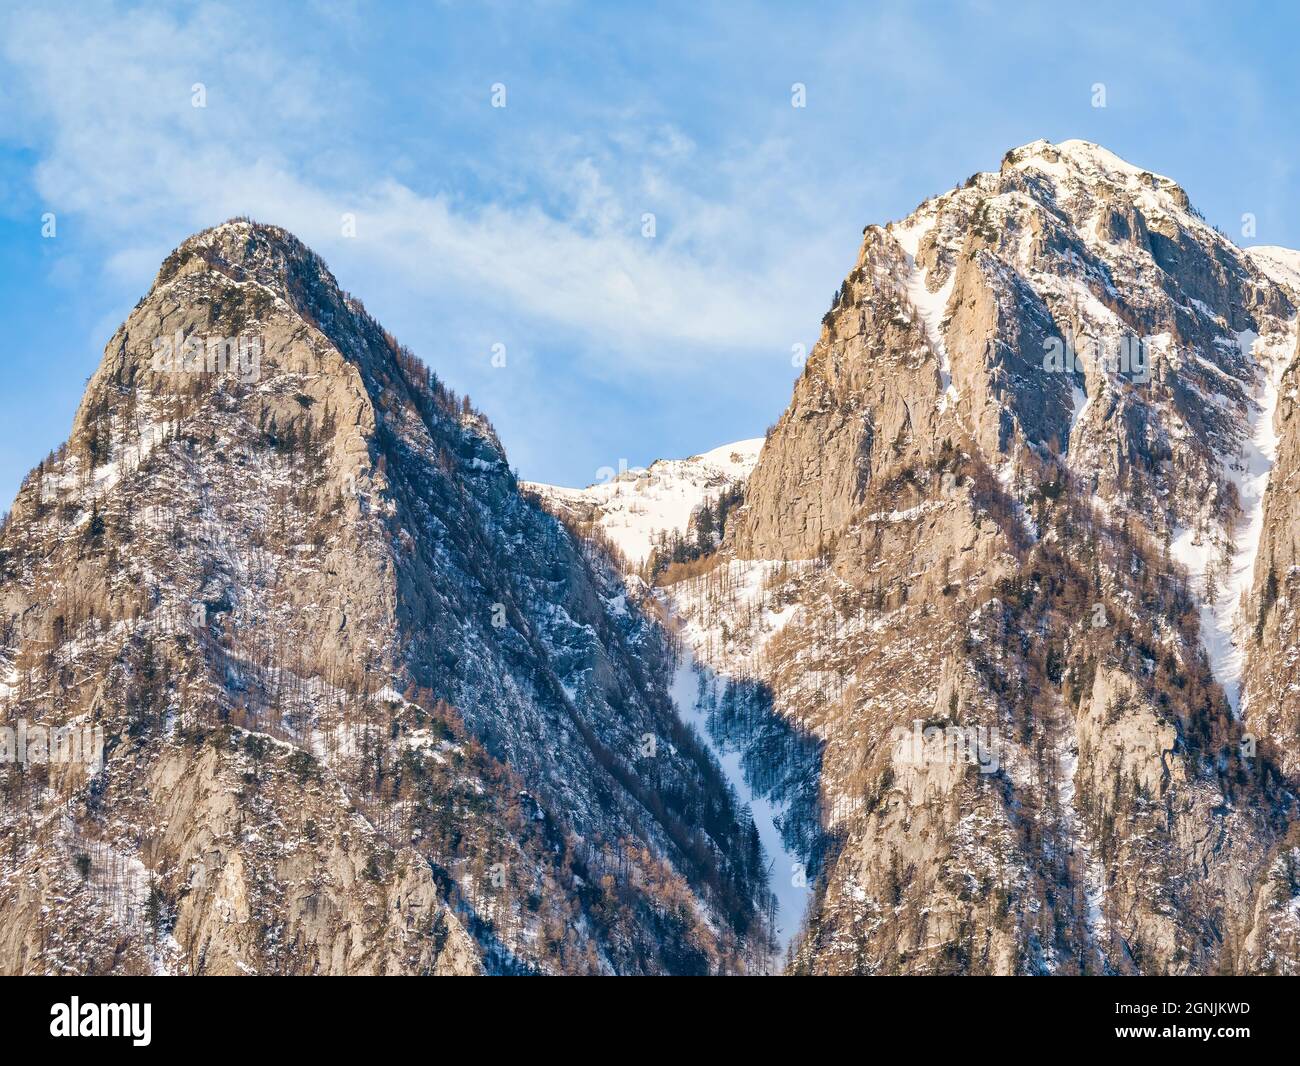 Detail with a pyramid shaped rocky peak covered in snow in the Bucegi Montains, Romania Stock Photo